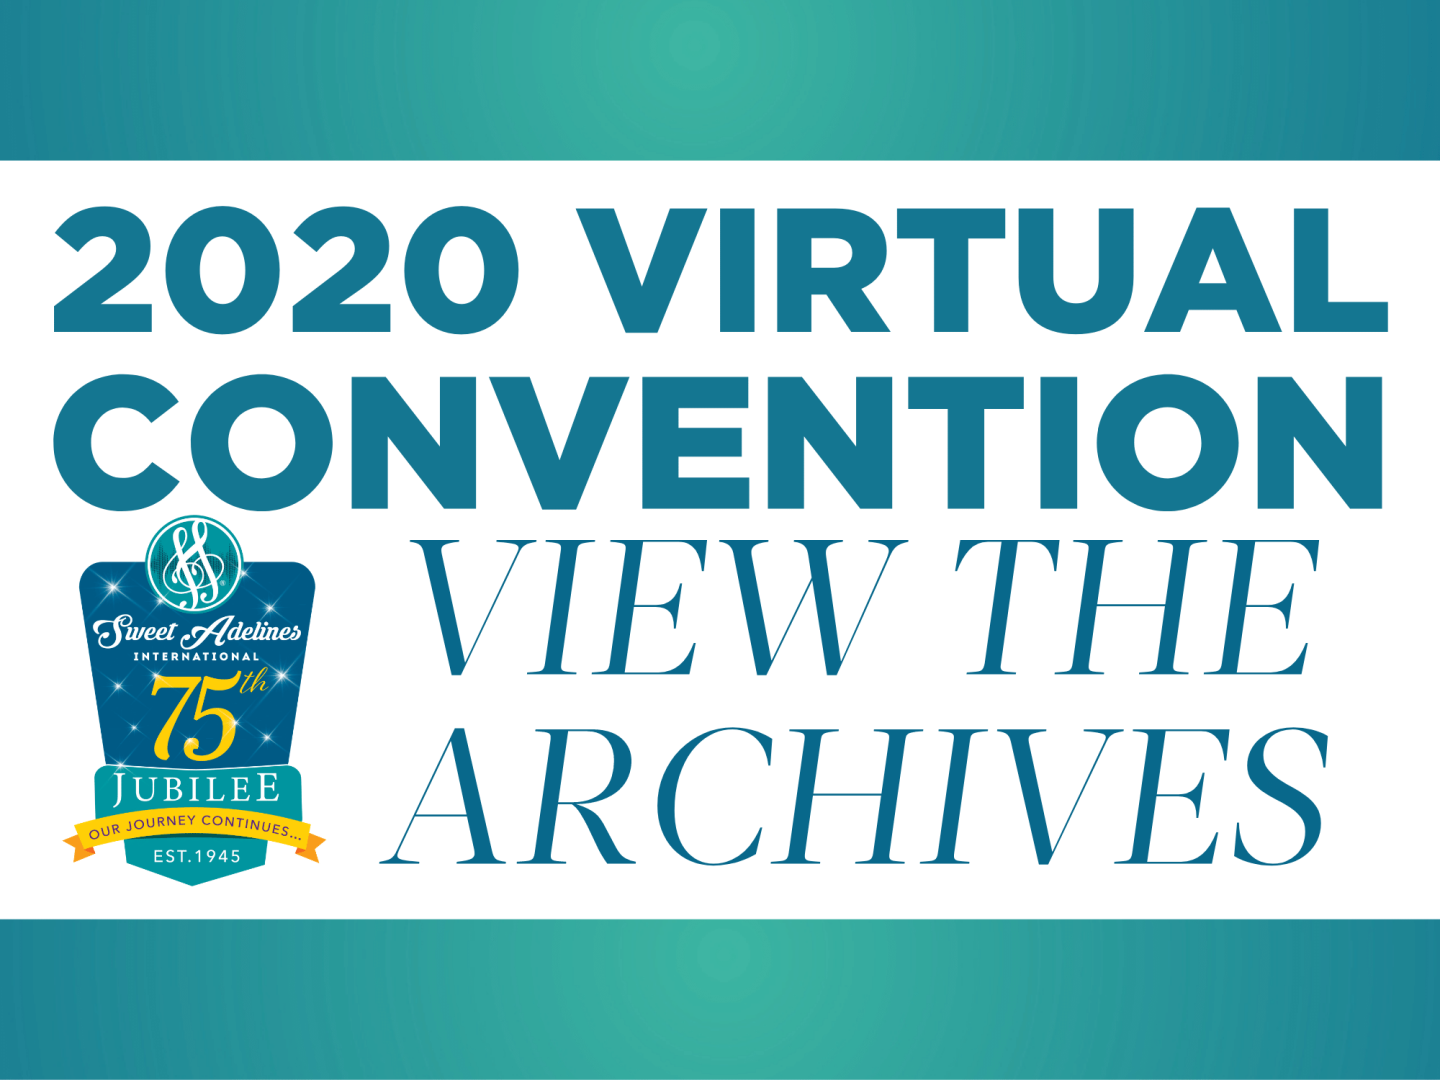 2020 Virtual Convention - Archives